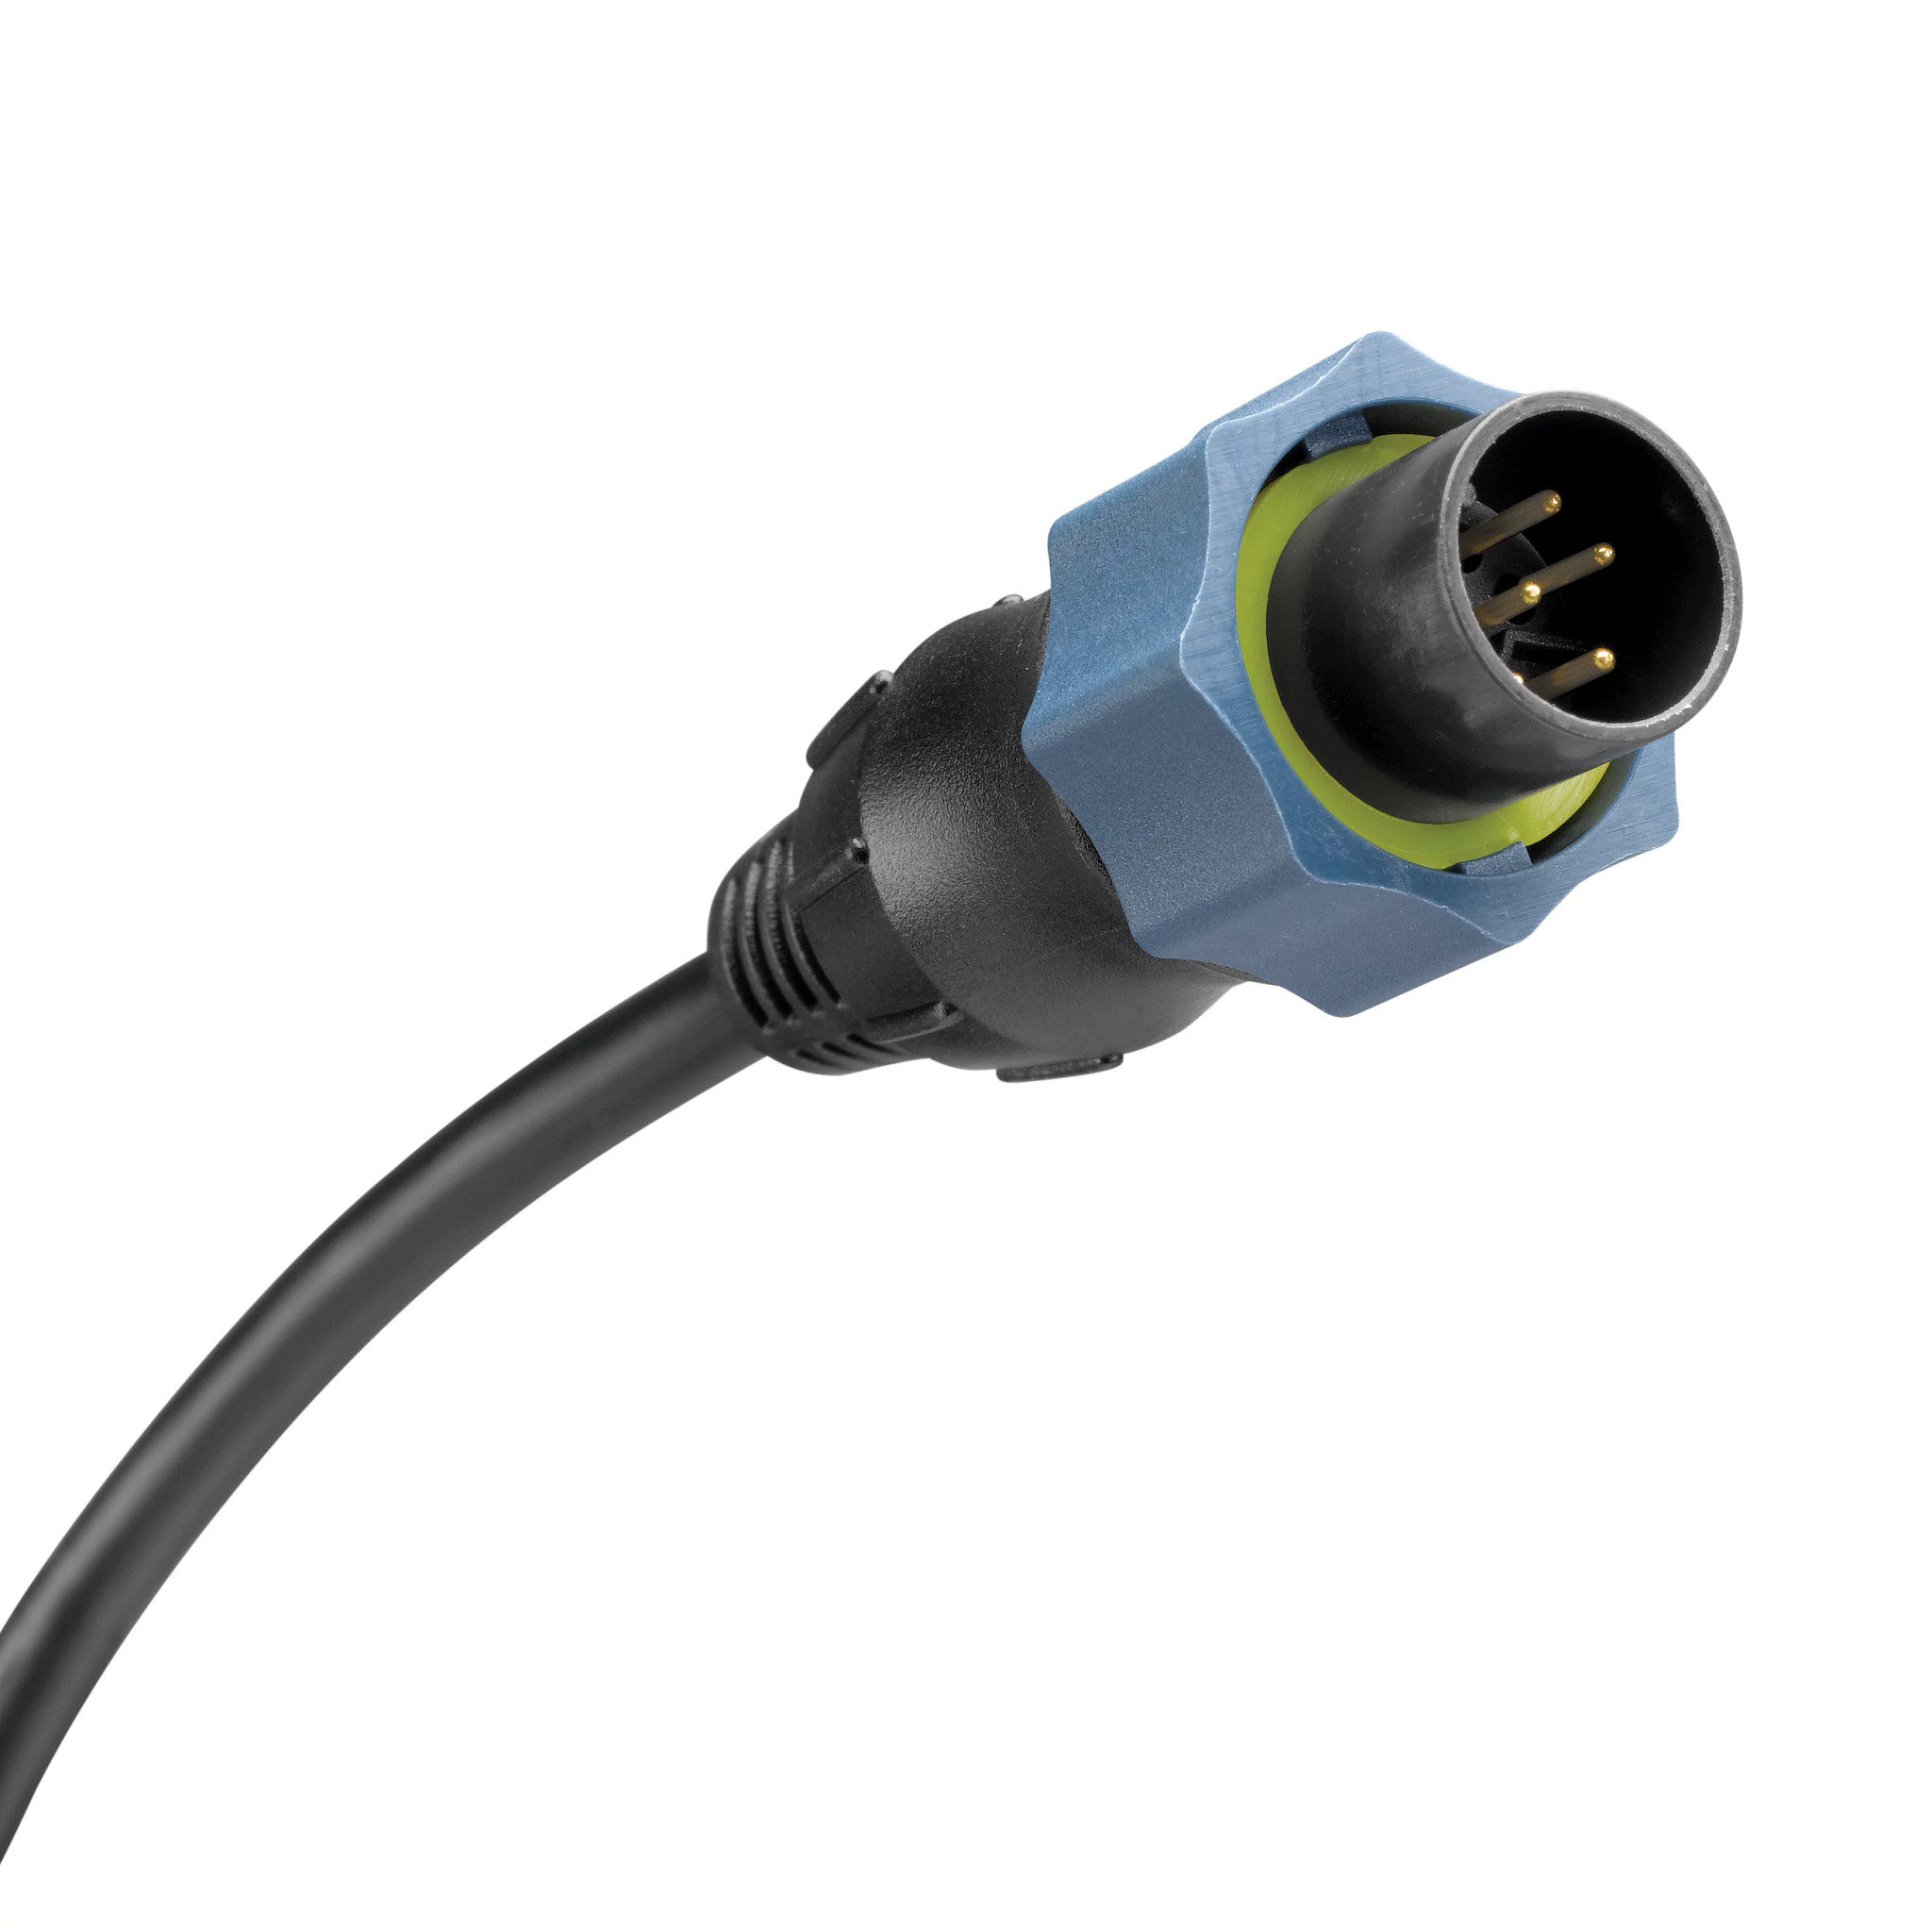 Us2 Adapter Cable Mkr 10